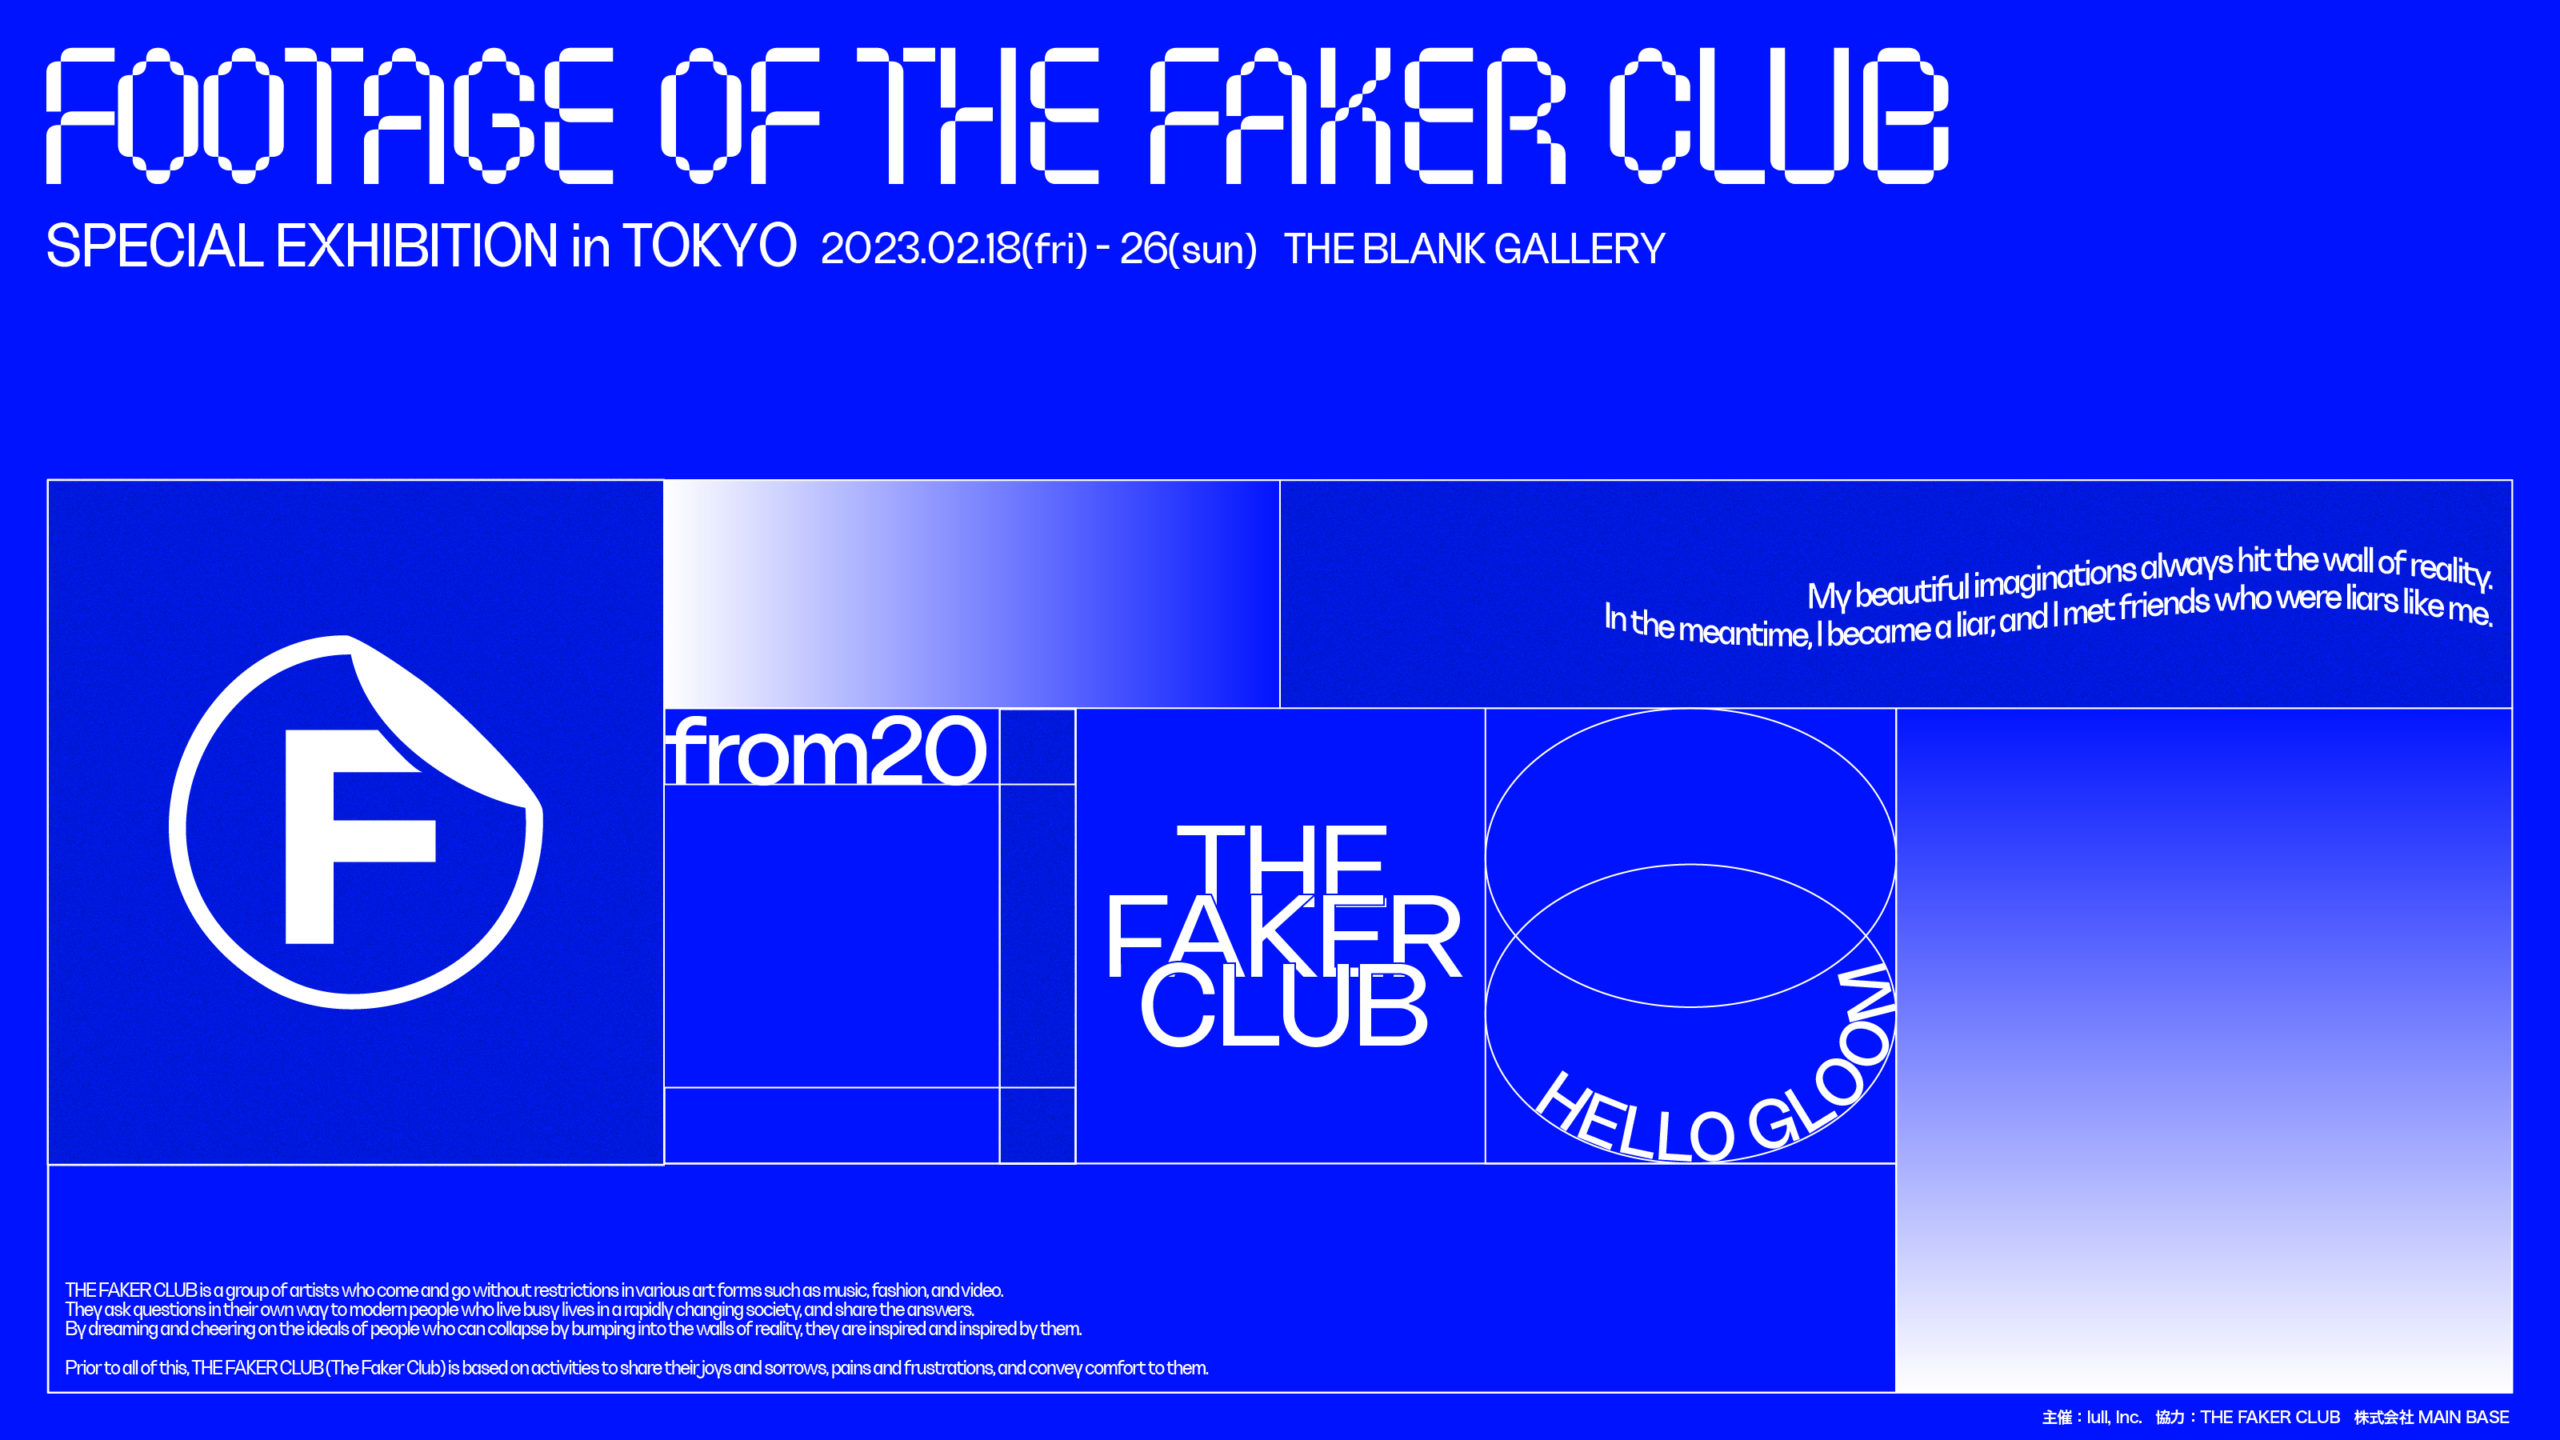 FOOTAGE OF THE FAKER CLUB - SPECIAL EXHIBITION in TOKYO - ミニツアーイベント